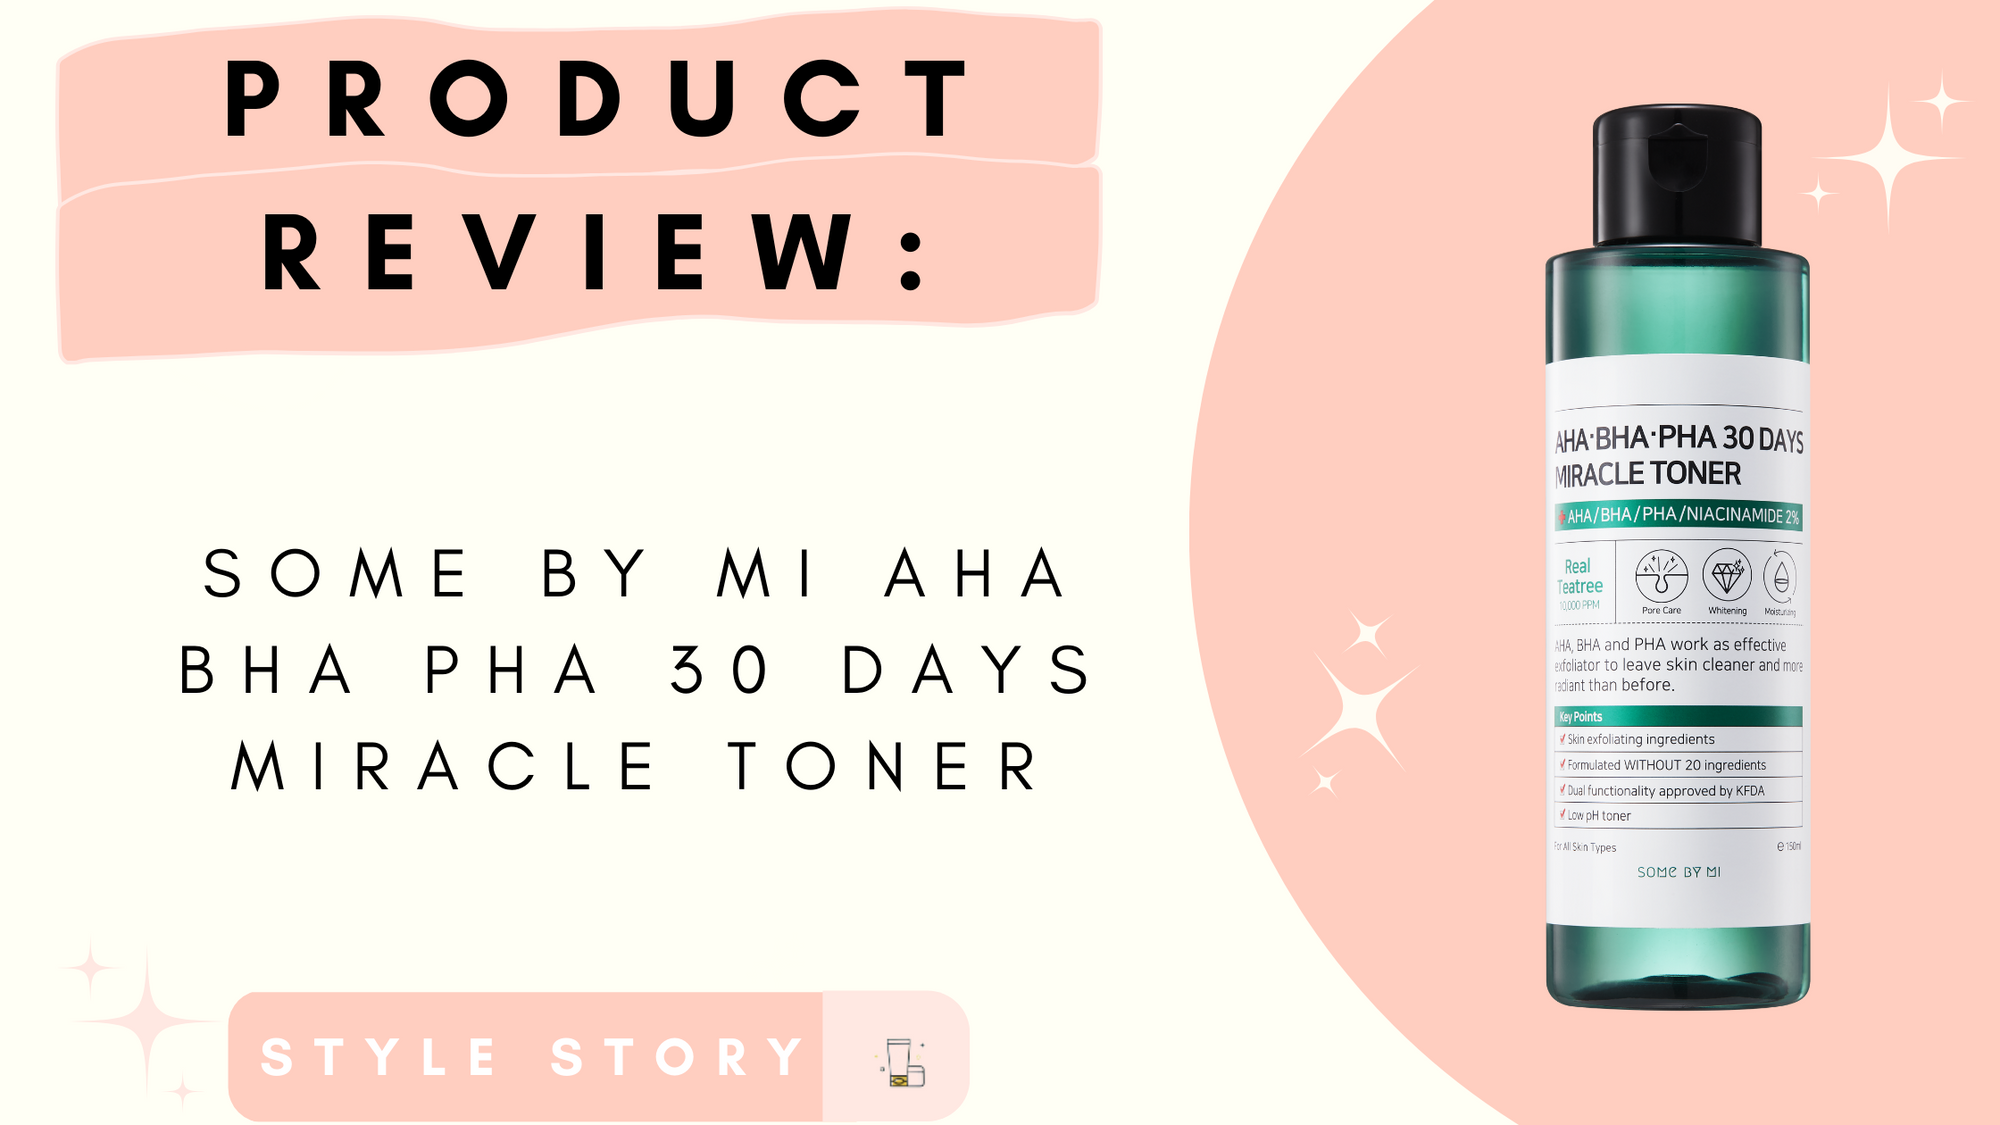 SOME BY ME AHA BHA PHA MIRACLE TONER REVIEW